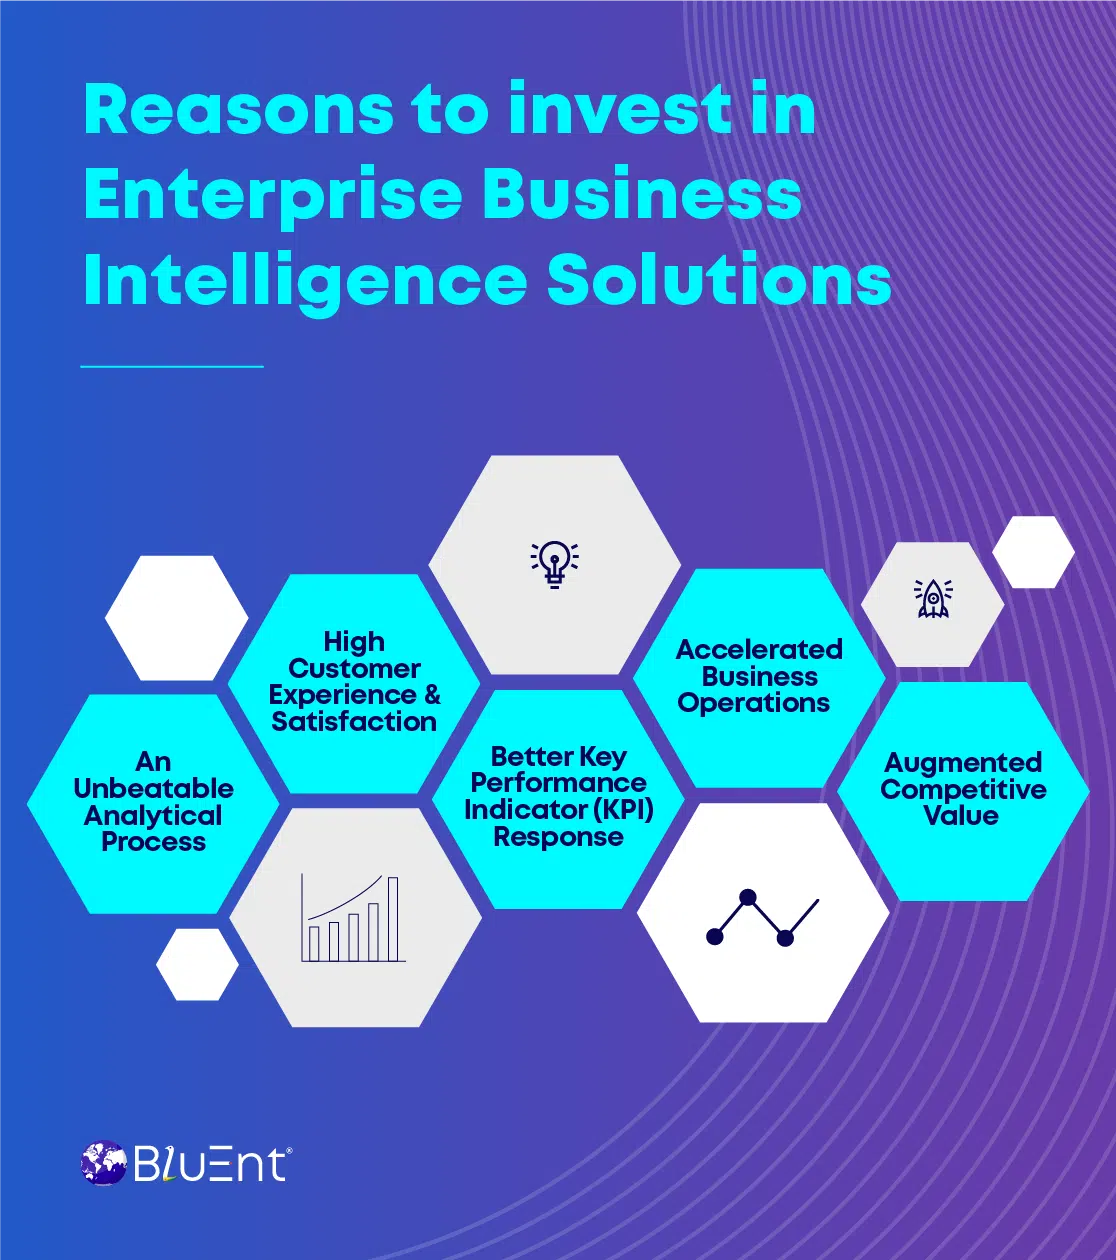 Why Invest in Enterprise BI Solutions?